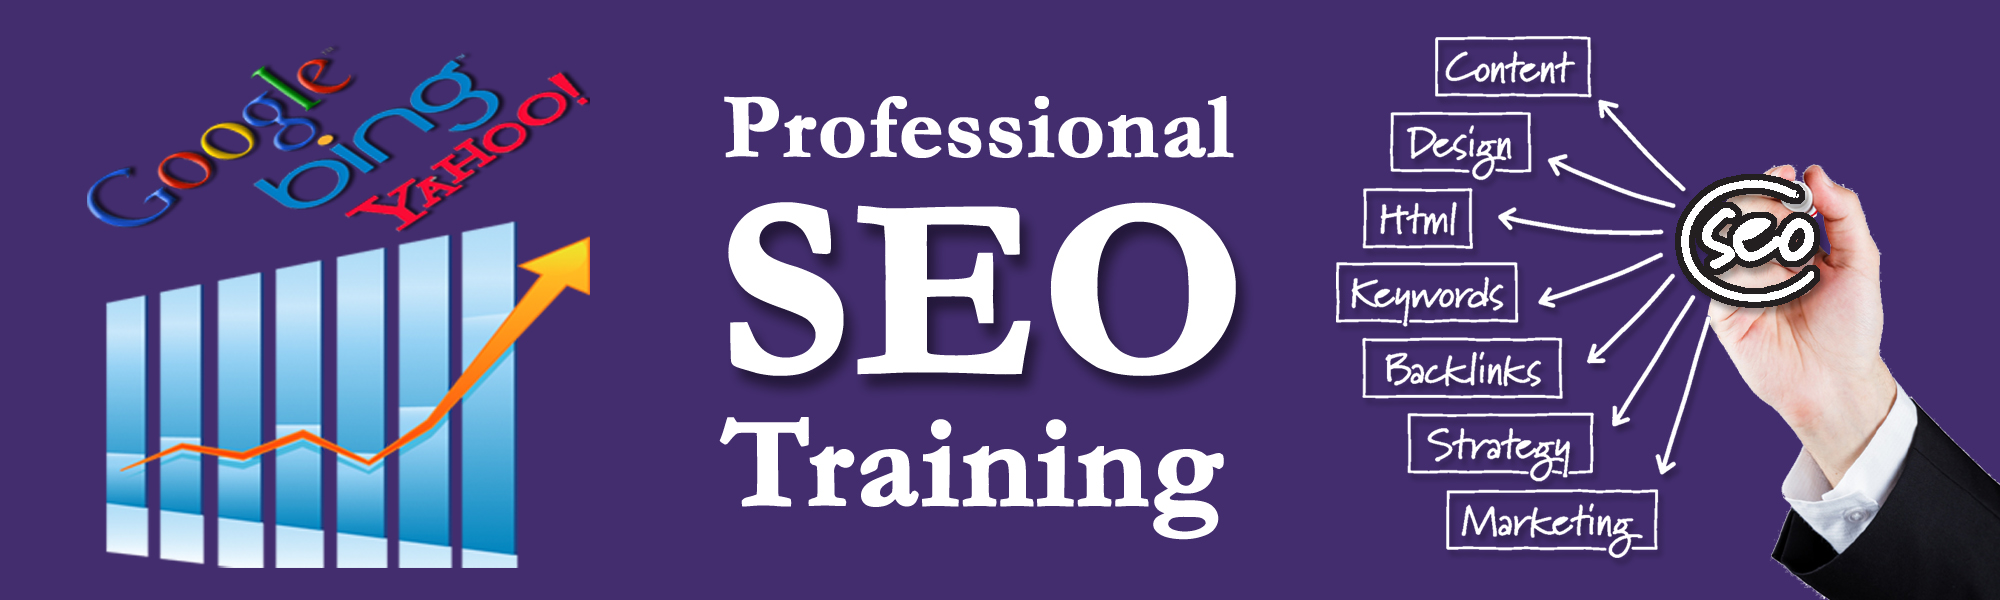 SEO course in Himachal Pradesh seo course in himachal pradesh SEO course in Himachal Pradesh with Google certifcate | live projects SEO course in himachal Pradesh